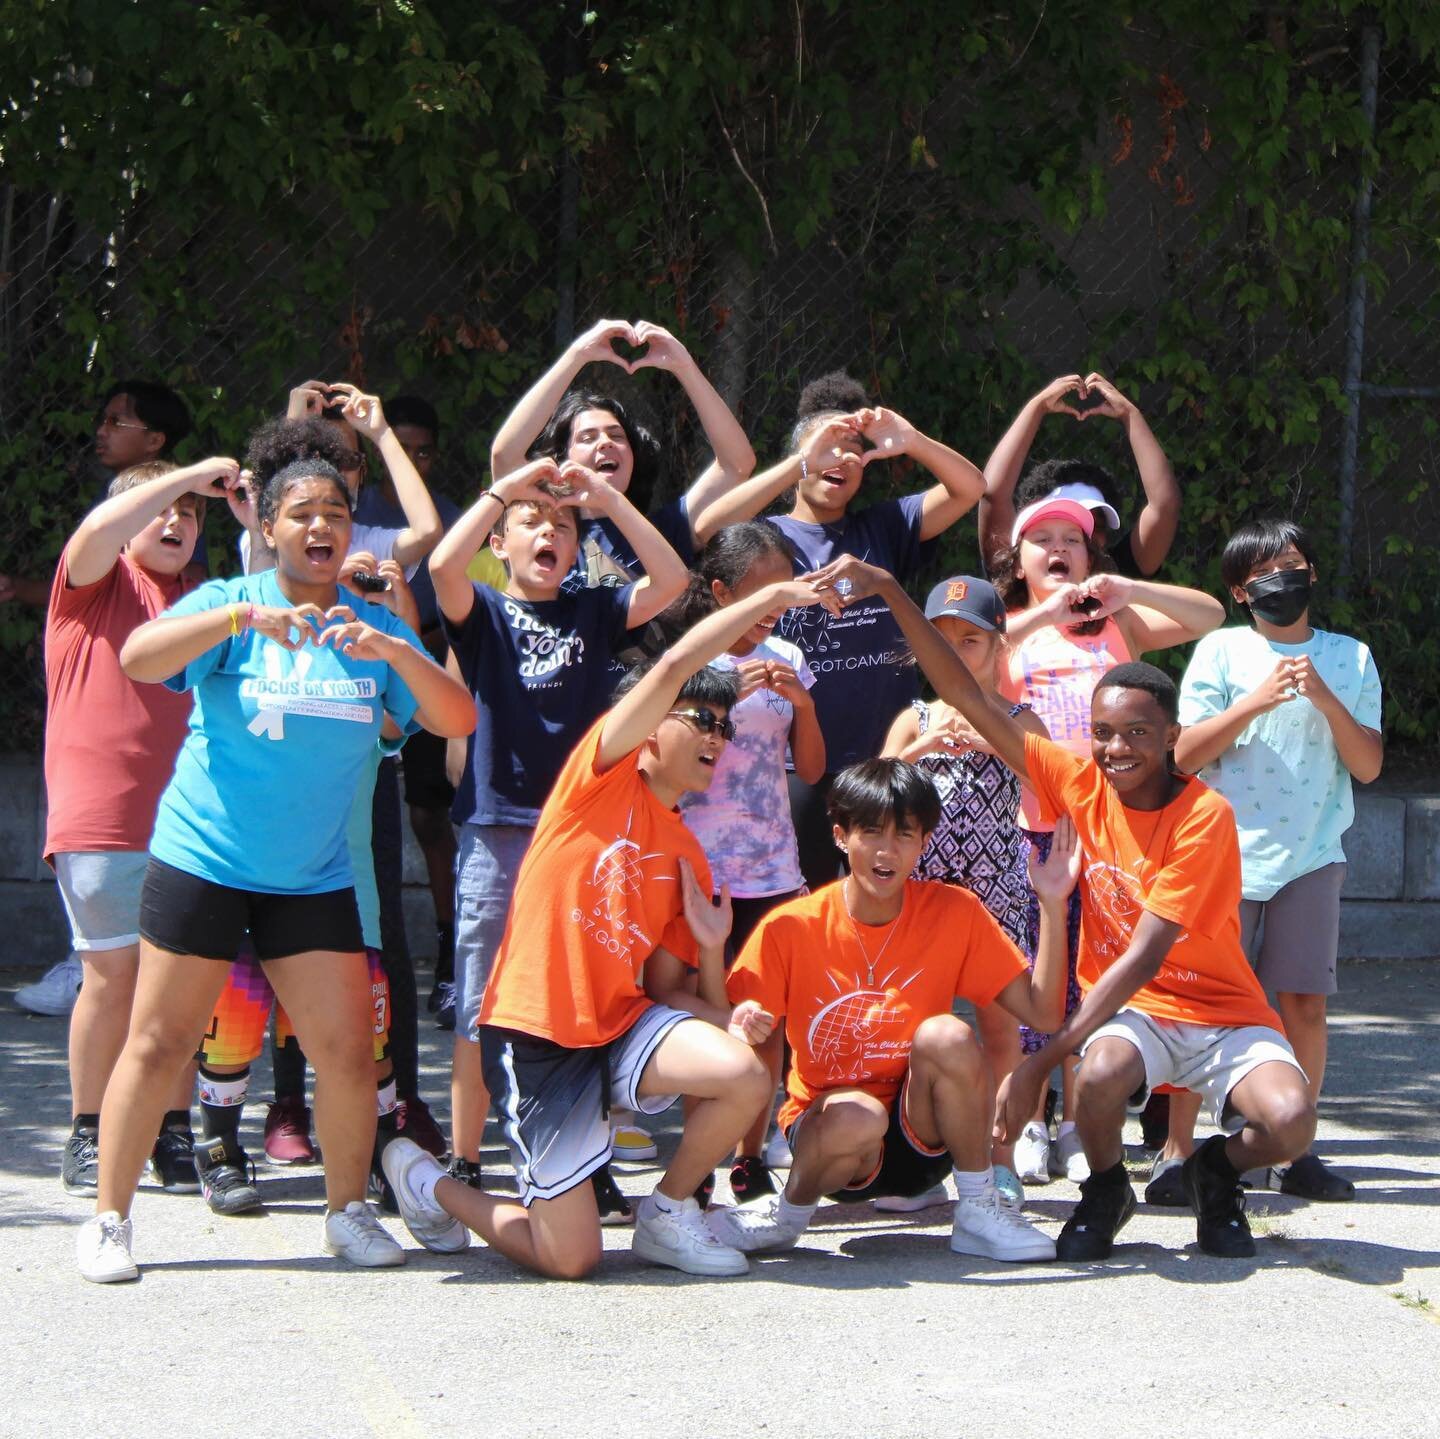 DERRYDOWNS &amp; CALEDONIA met up with MOUNT DENNIS today for some games, cheers, and BBQ! Huge thank you to Mike and team from the Jane and Finch Freshco for supplying the hot dogs! 

- 

#summer #summercamp #cheer #games #toronto #torontocamp #dayc